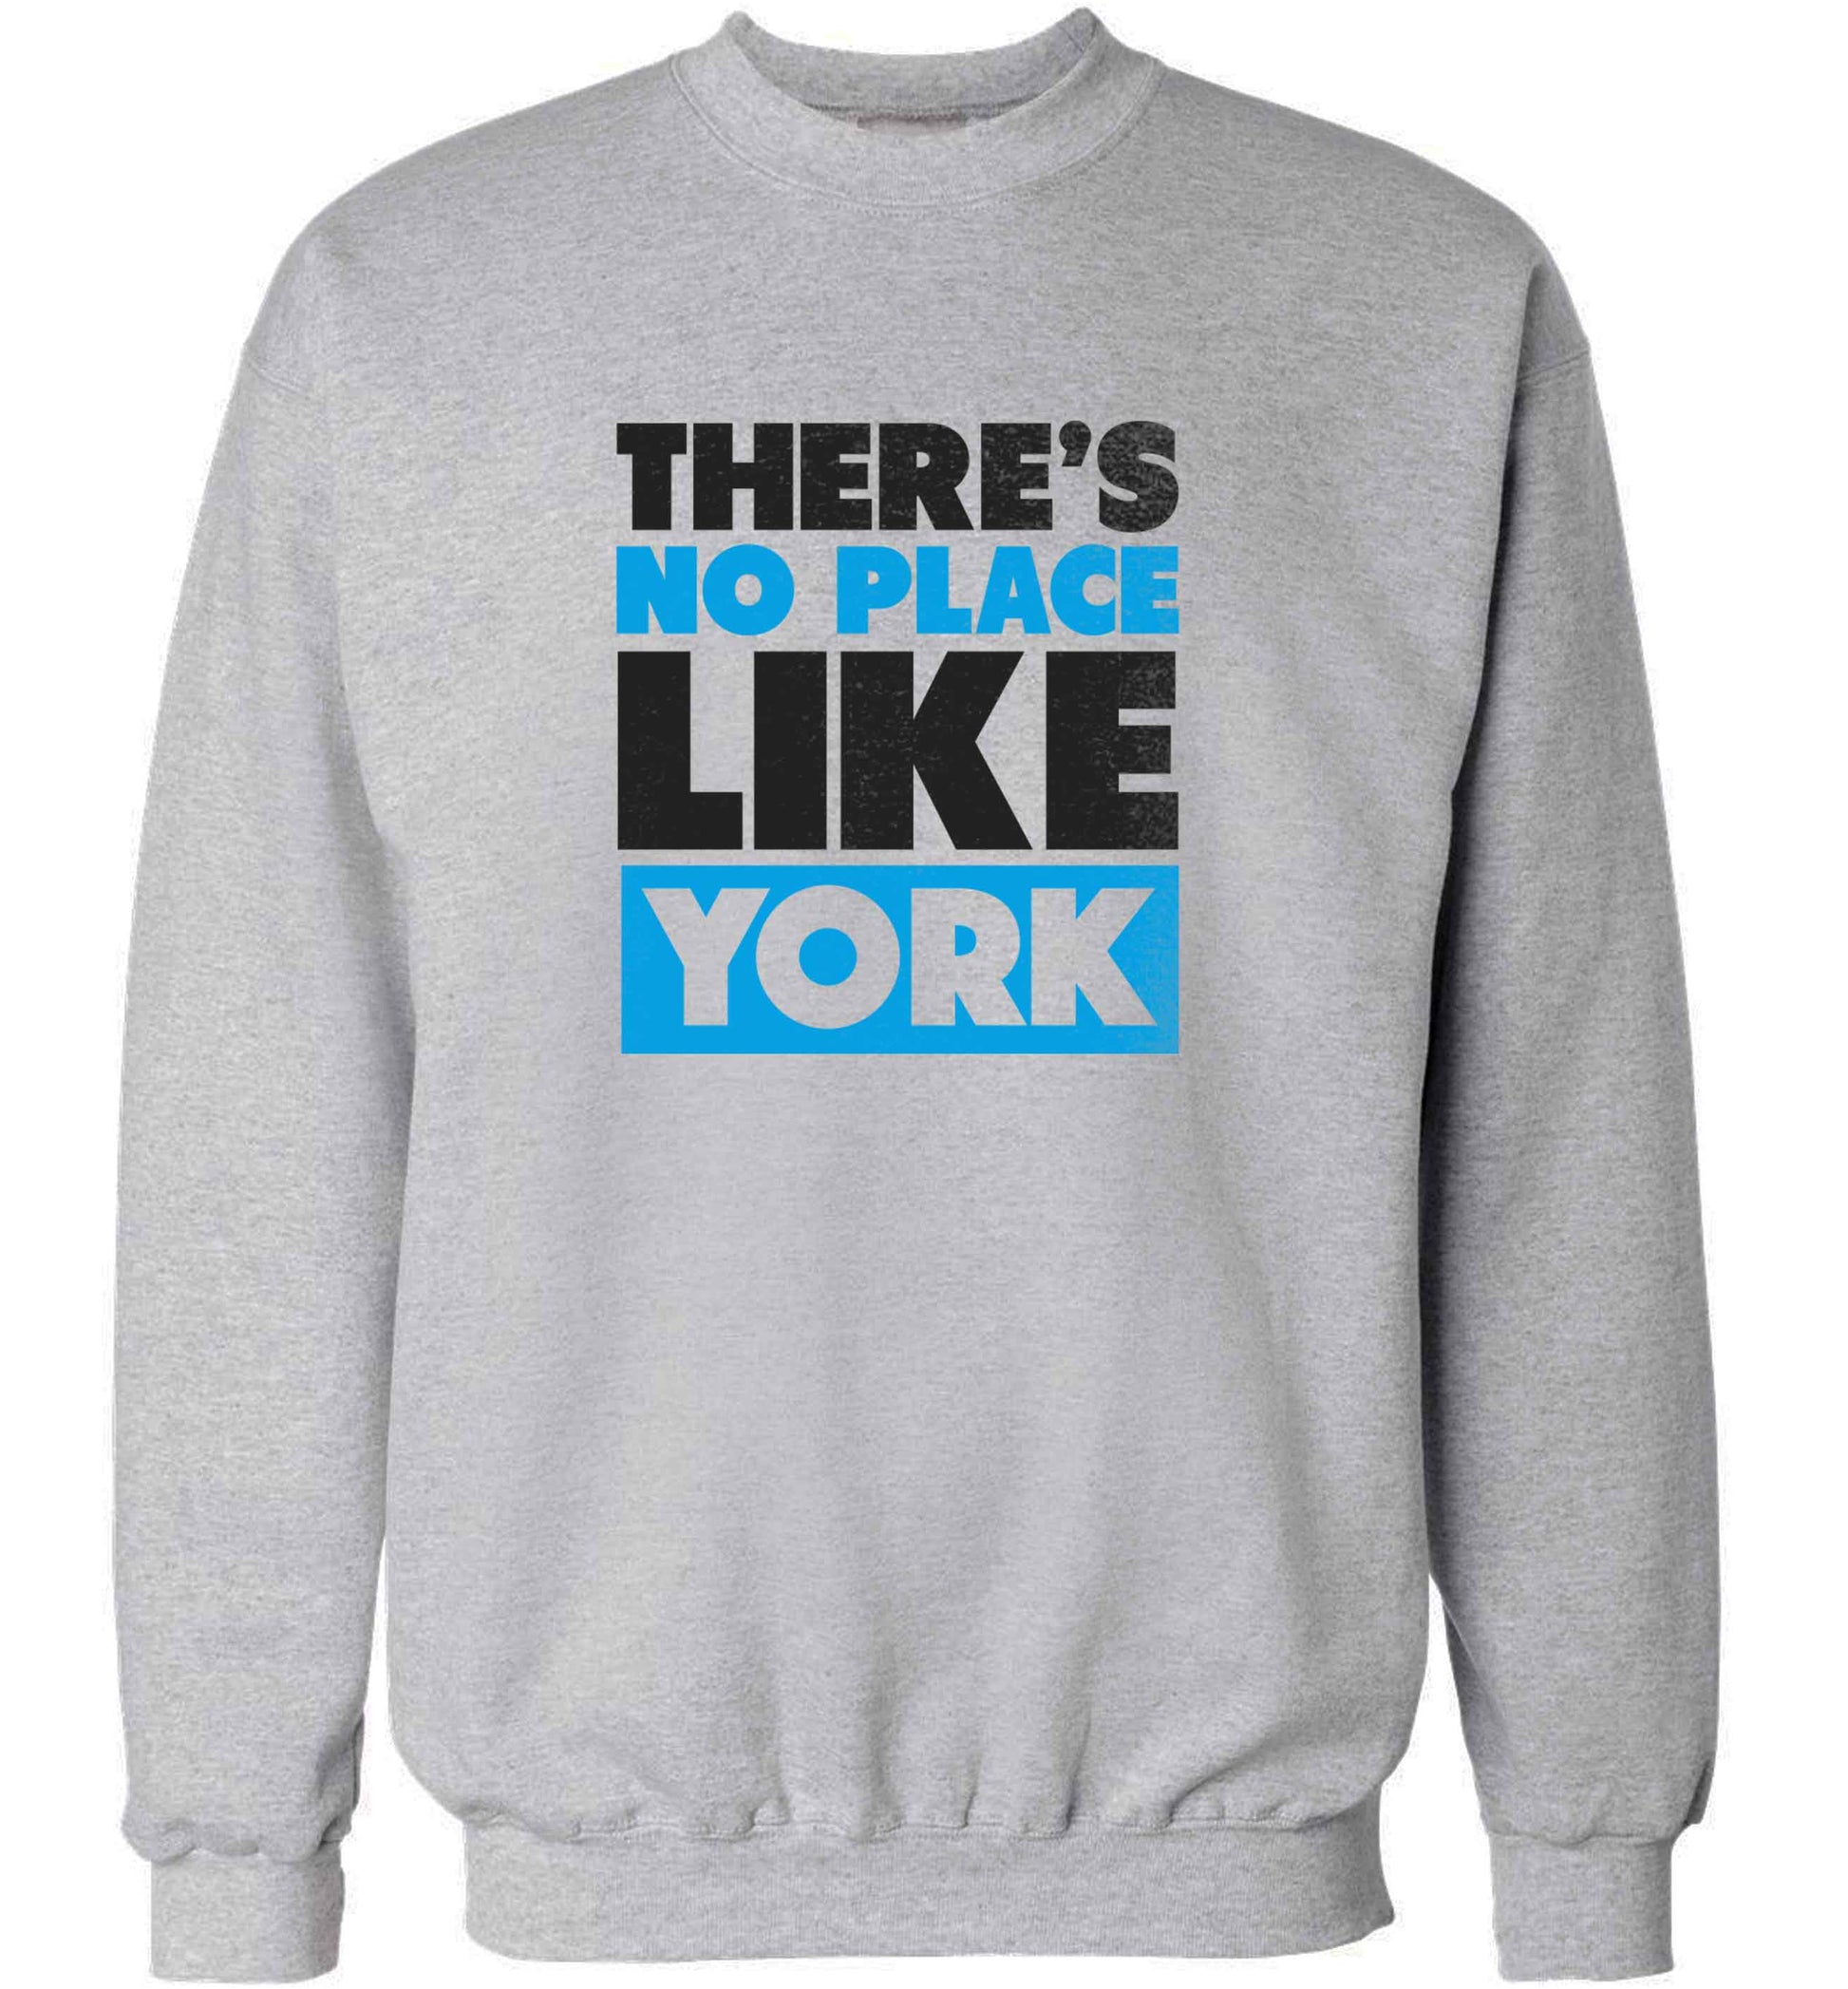 There's no place like york adult's unisex grey sweater 2XL